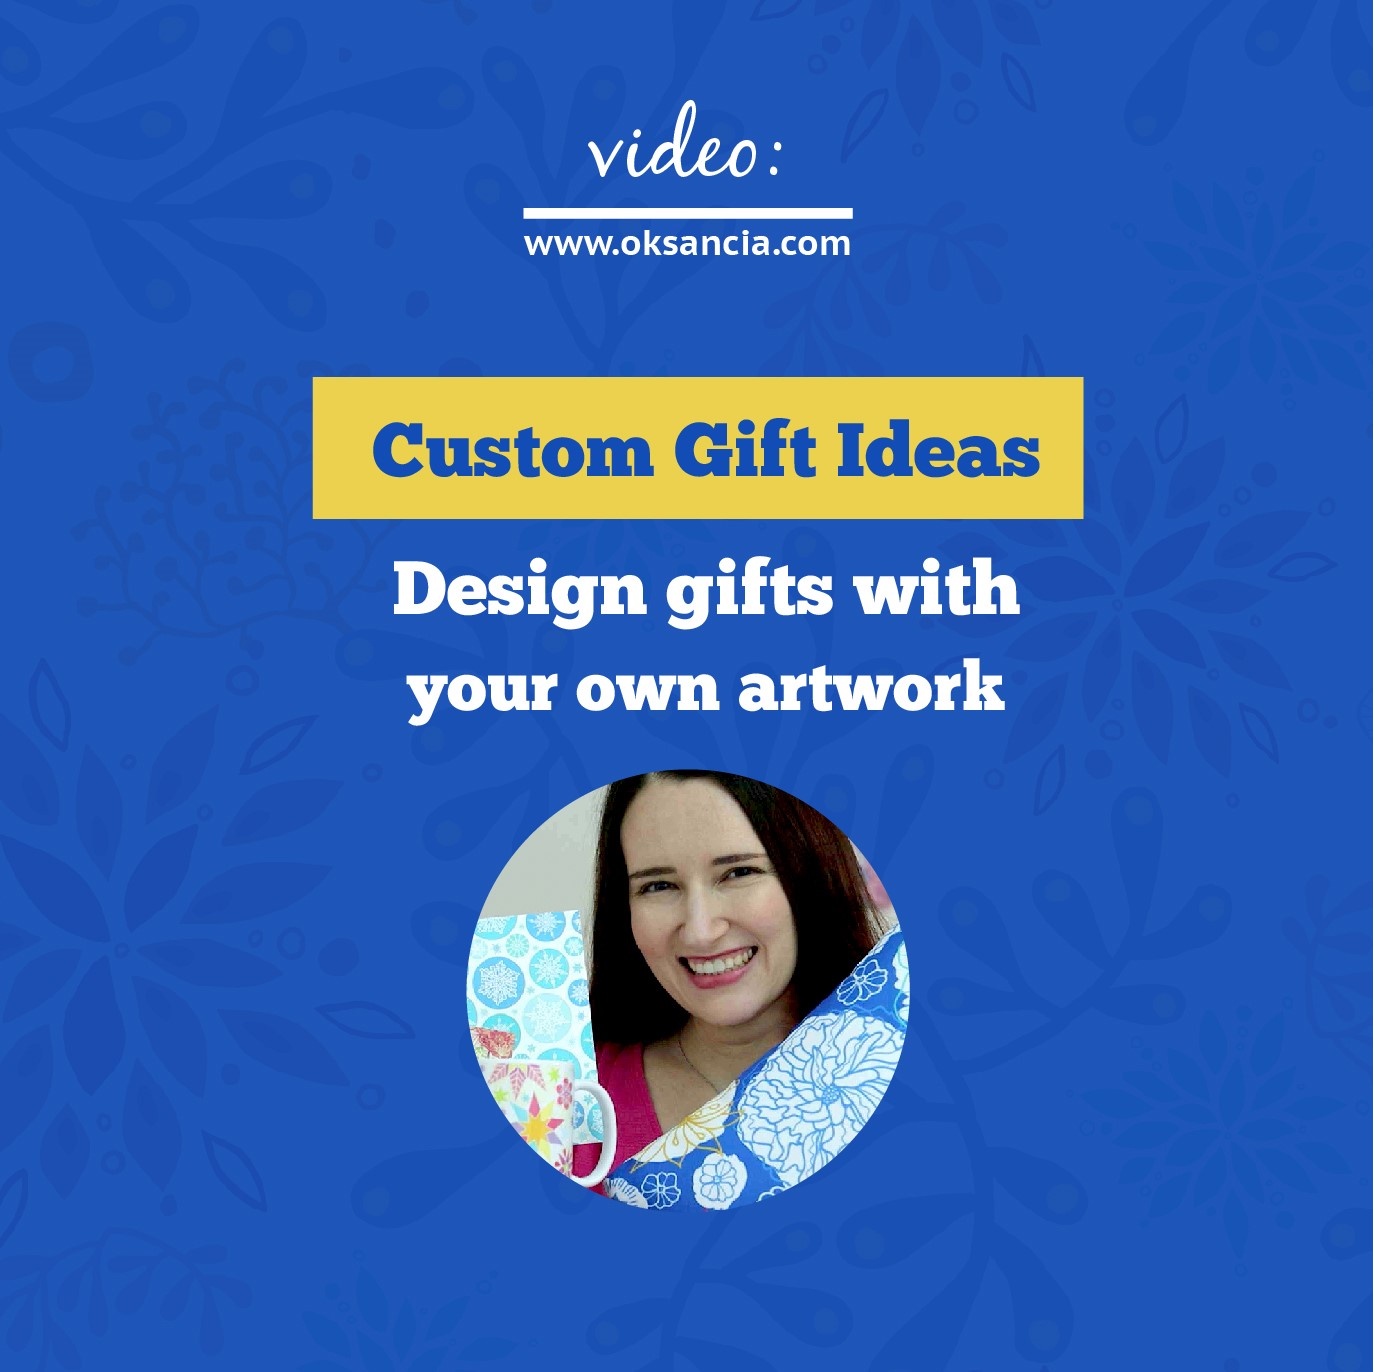 HOW TO DESIGN YOUR OWN CUSTOM GIFTS FEATURING YOUR OWN ARTWORK OR DESIGNS AFFORDABLE GIFT IDEAS.